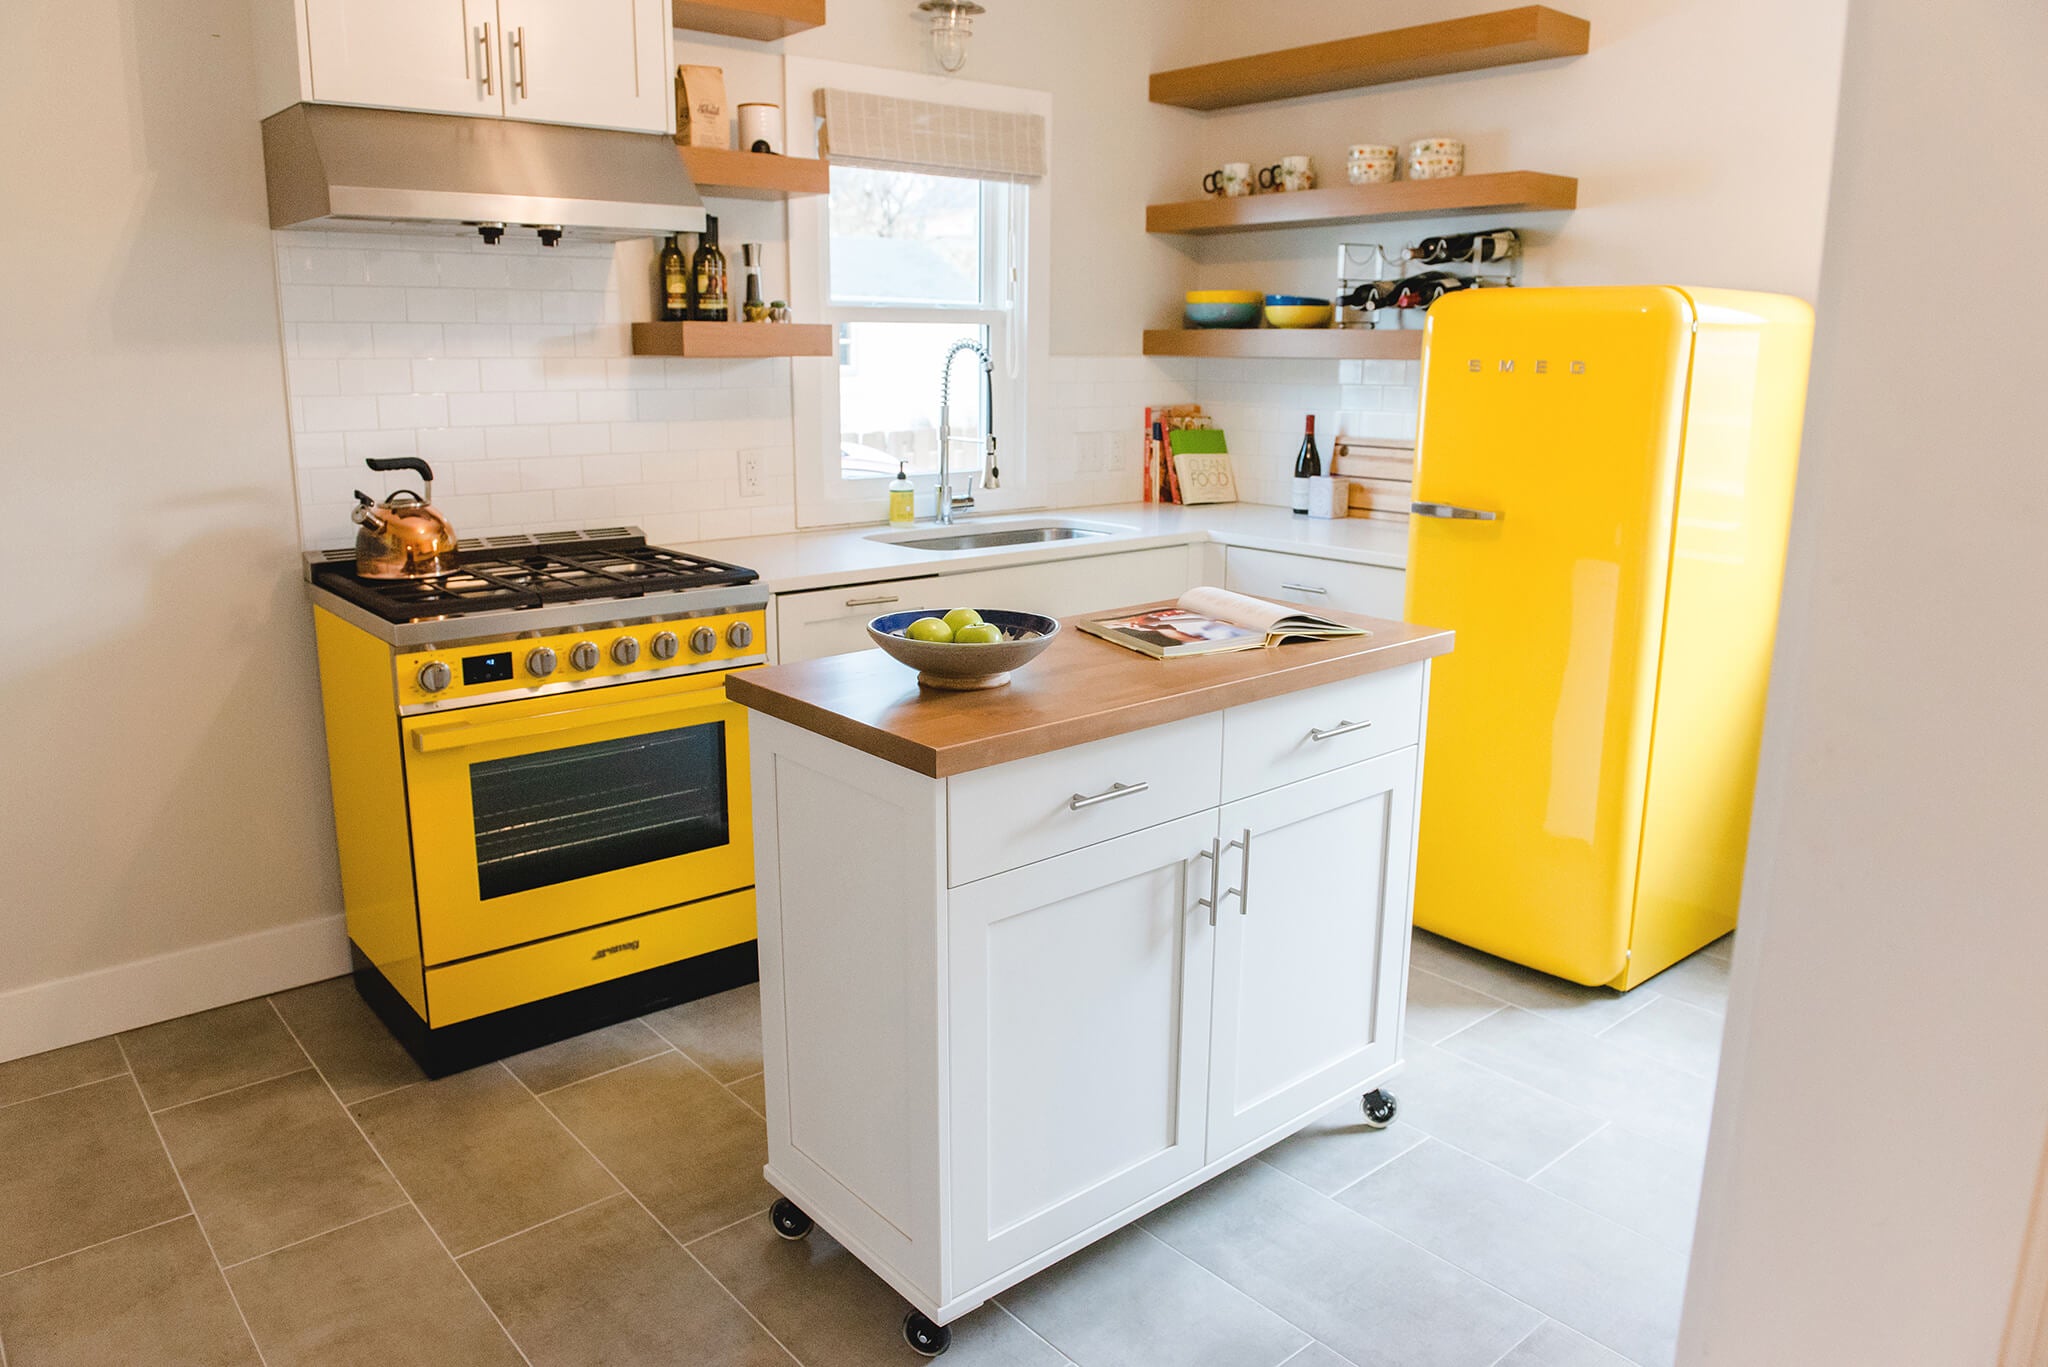 Mid-century modern kitchen with custom white shaker cabinets, rolling kitchen cart, yellow SMEG appliances, and floating shelves